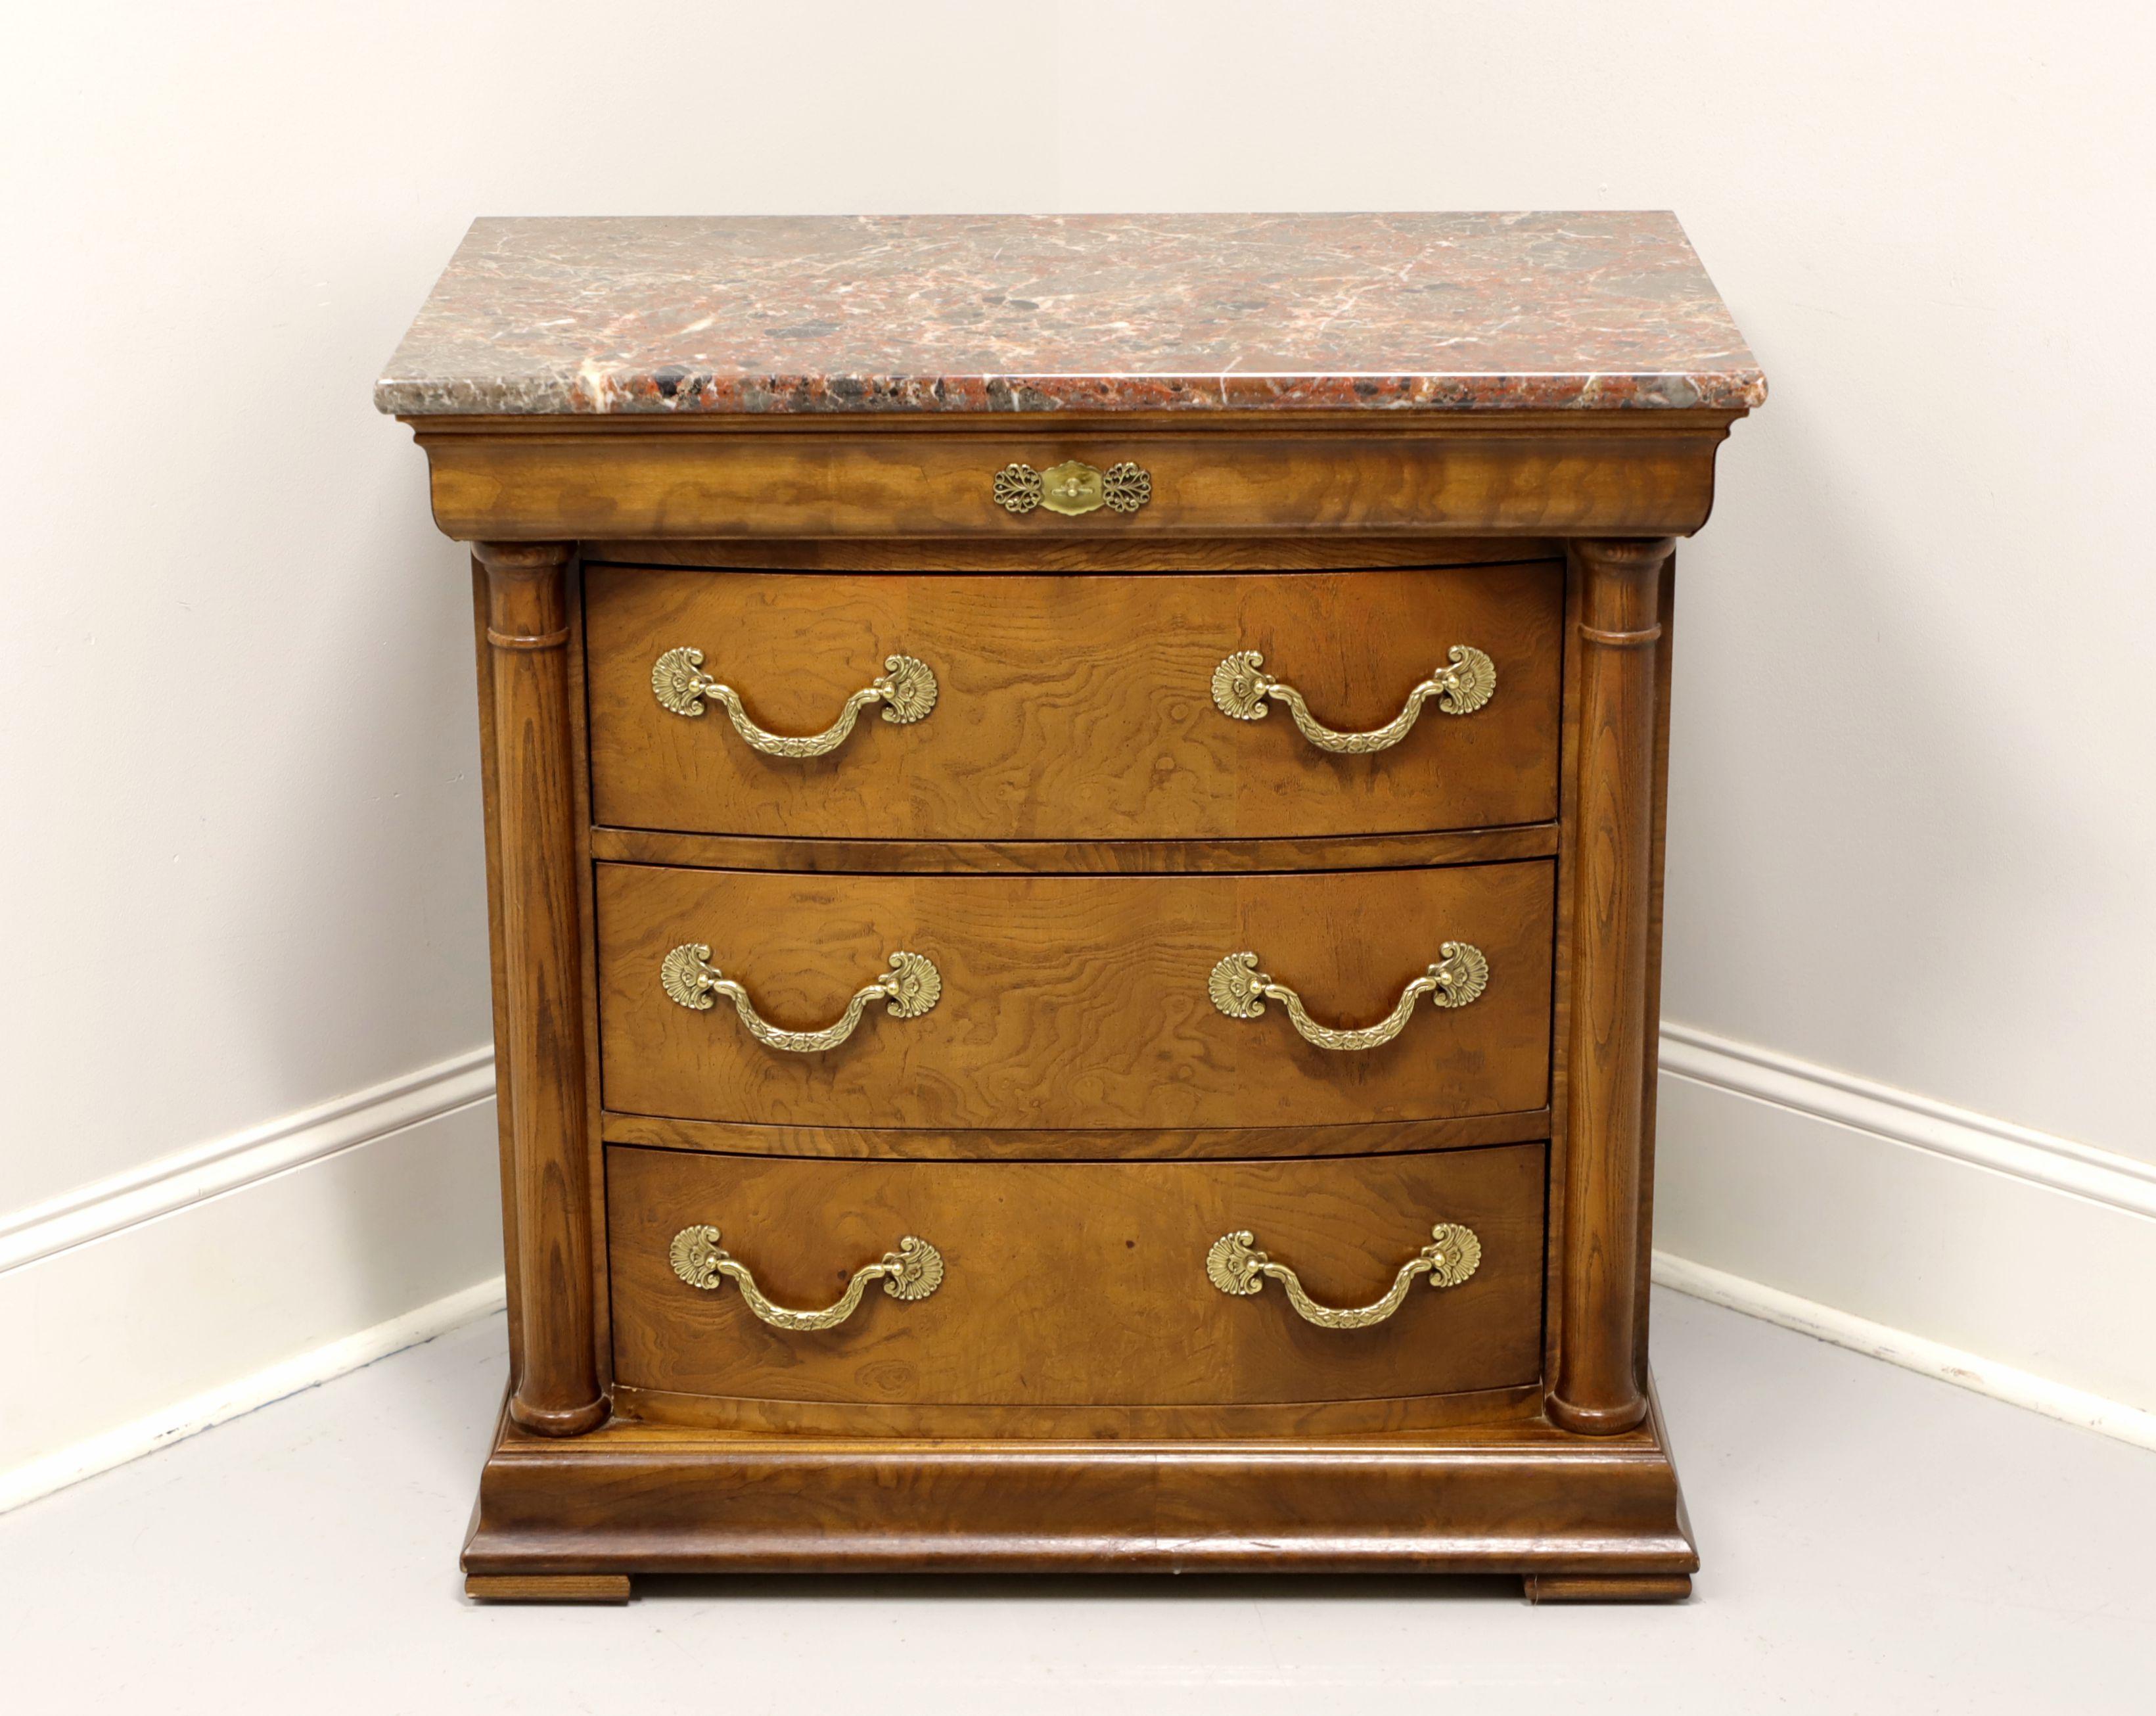 A bedside chest in the Neoclassical style by Henredon, of Morgantown, North Carolina, USA. Burl elm with marble top, decorative brass hardware, side columns and pad feet. Features a shallow dovetail drawer blended into the upper moulding with faux